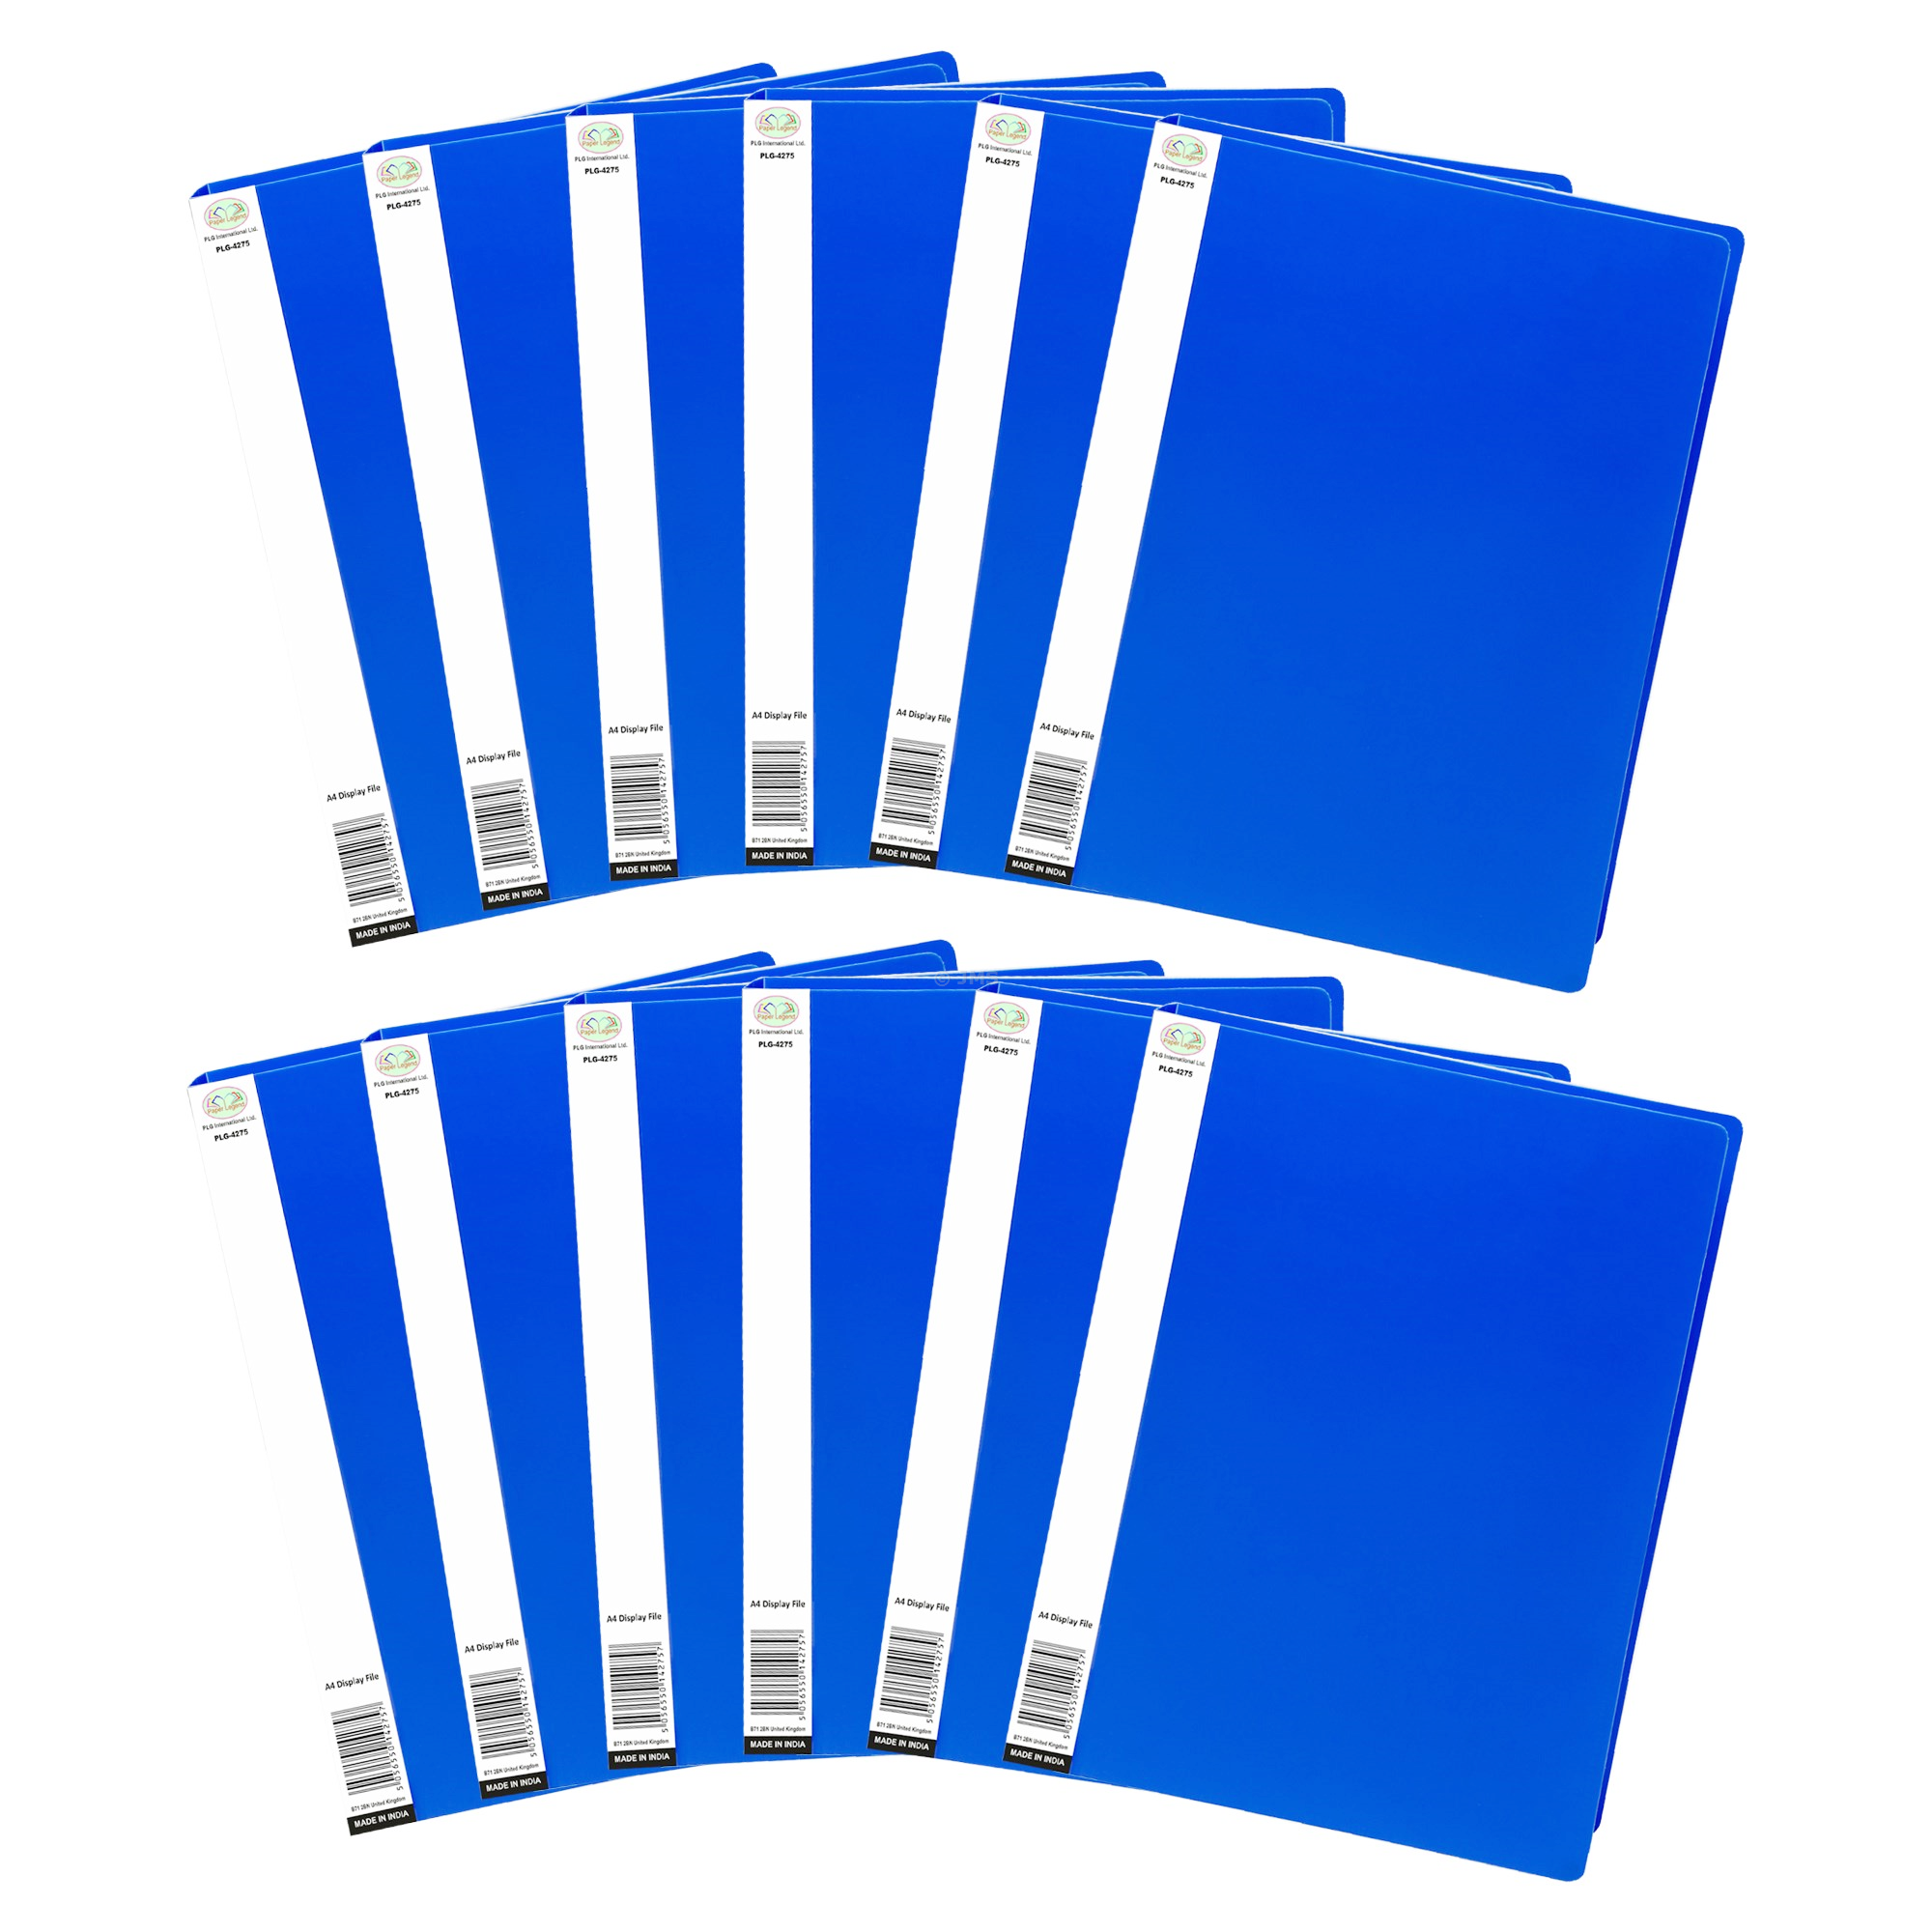 [Set of 12] A4 Display File Blue 20 Pockets (40 View) Portfolio Project Presentation Report Files Book Home School Office